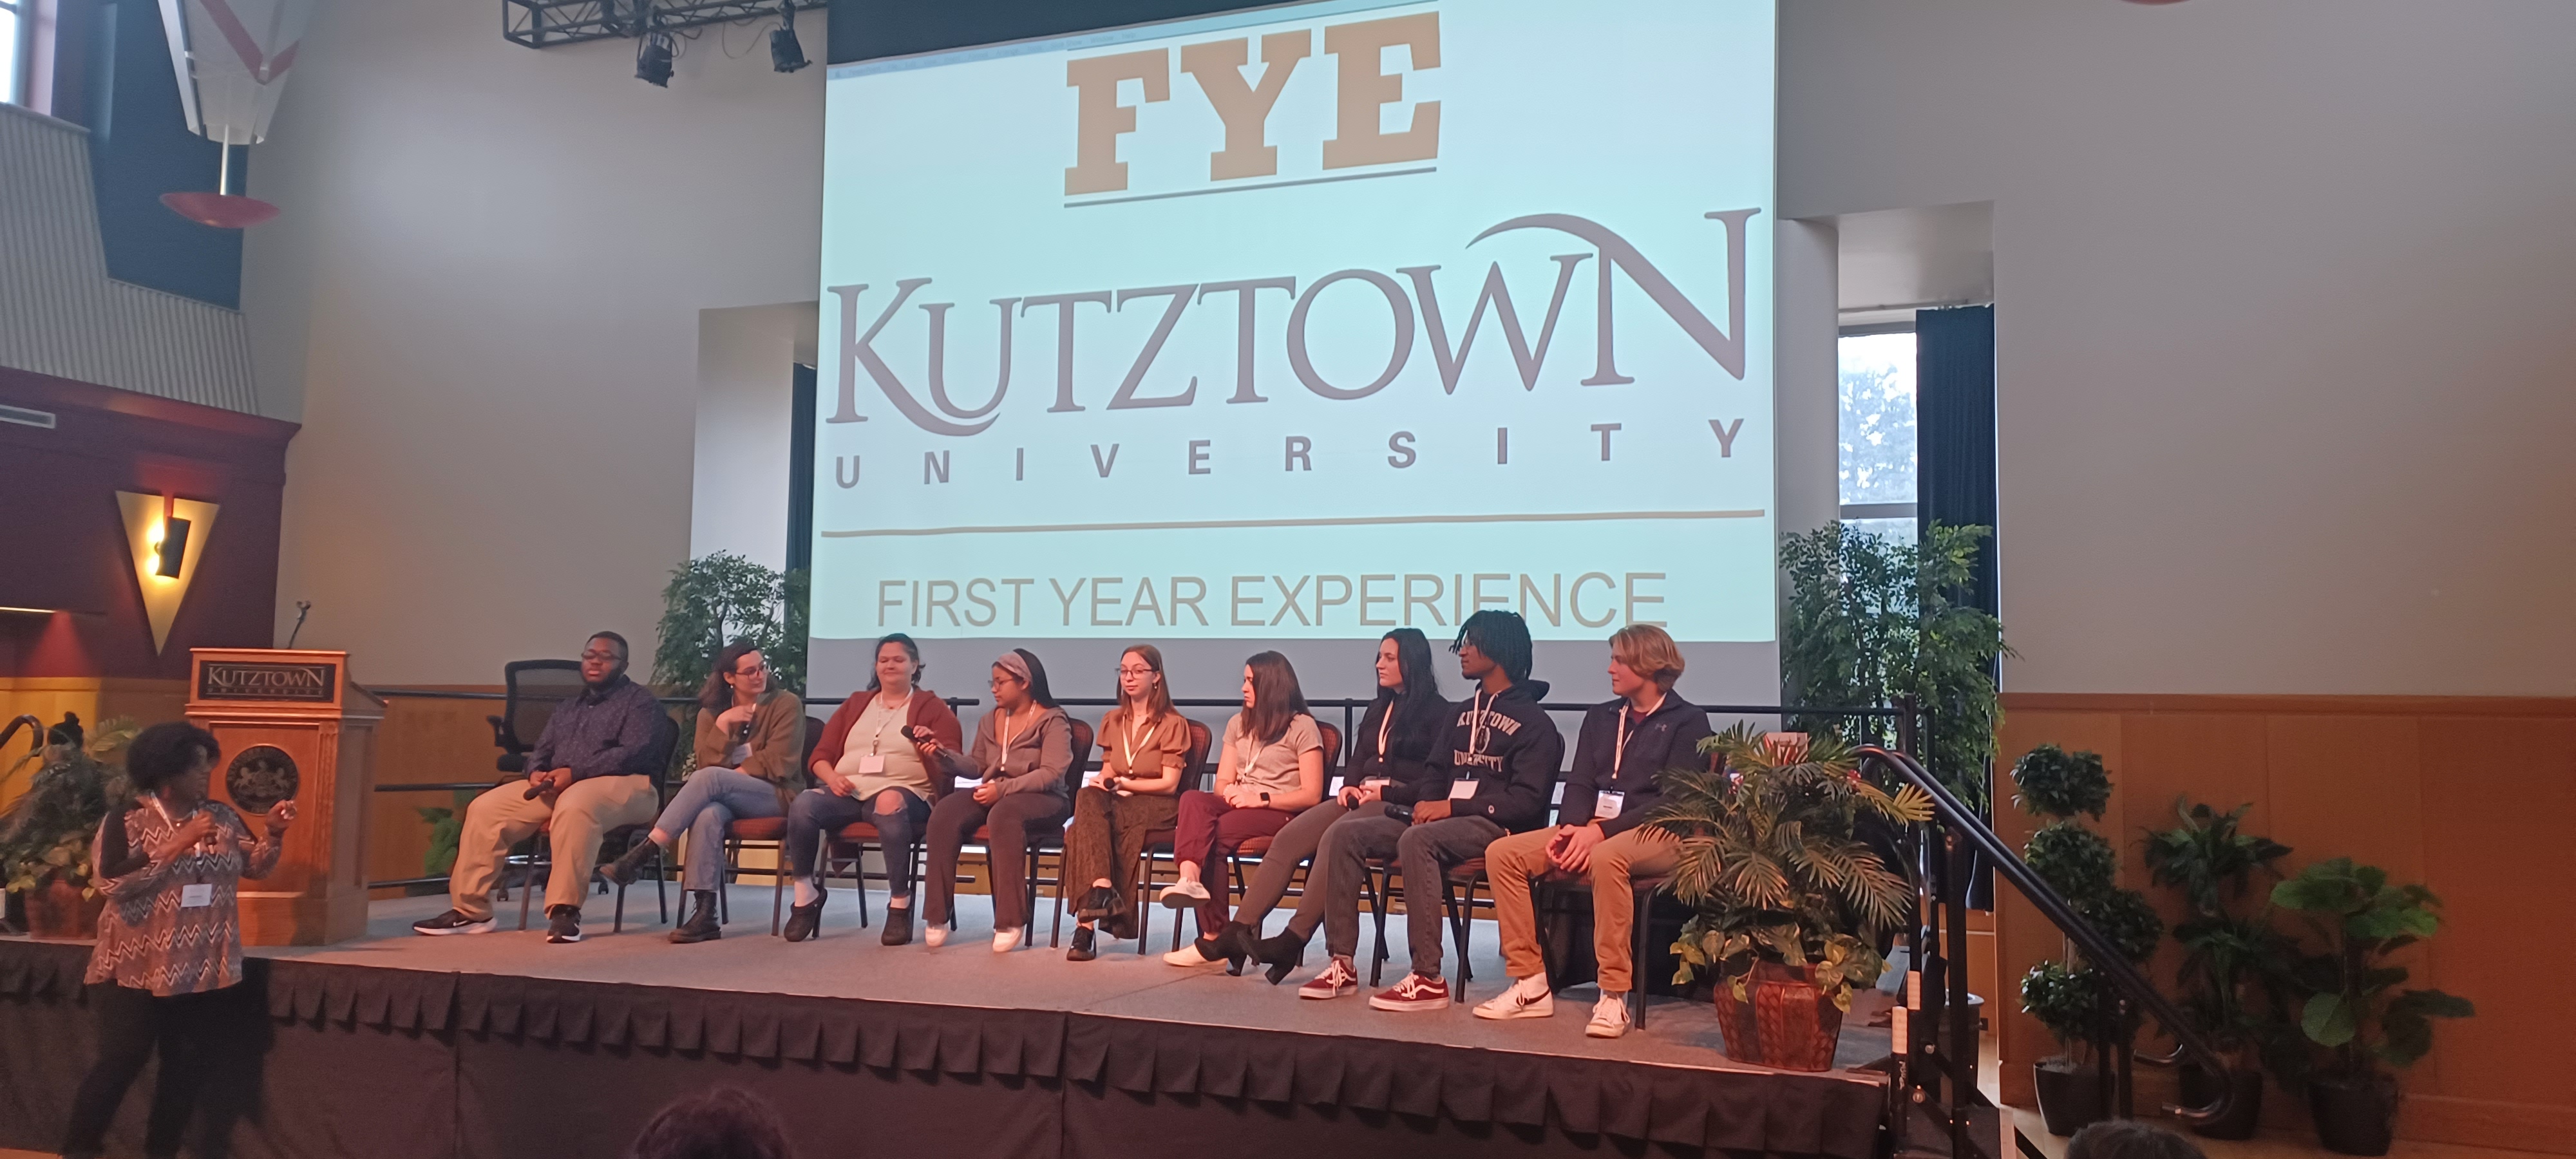 A lineup of KU students seated next to each other on stage in front of a slideshow presentation with the Kutztown University First Year Experience logo 